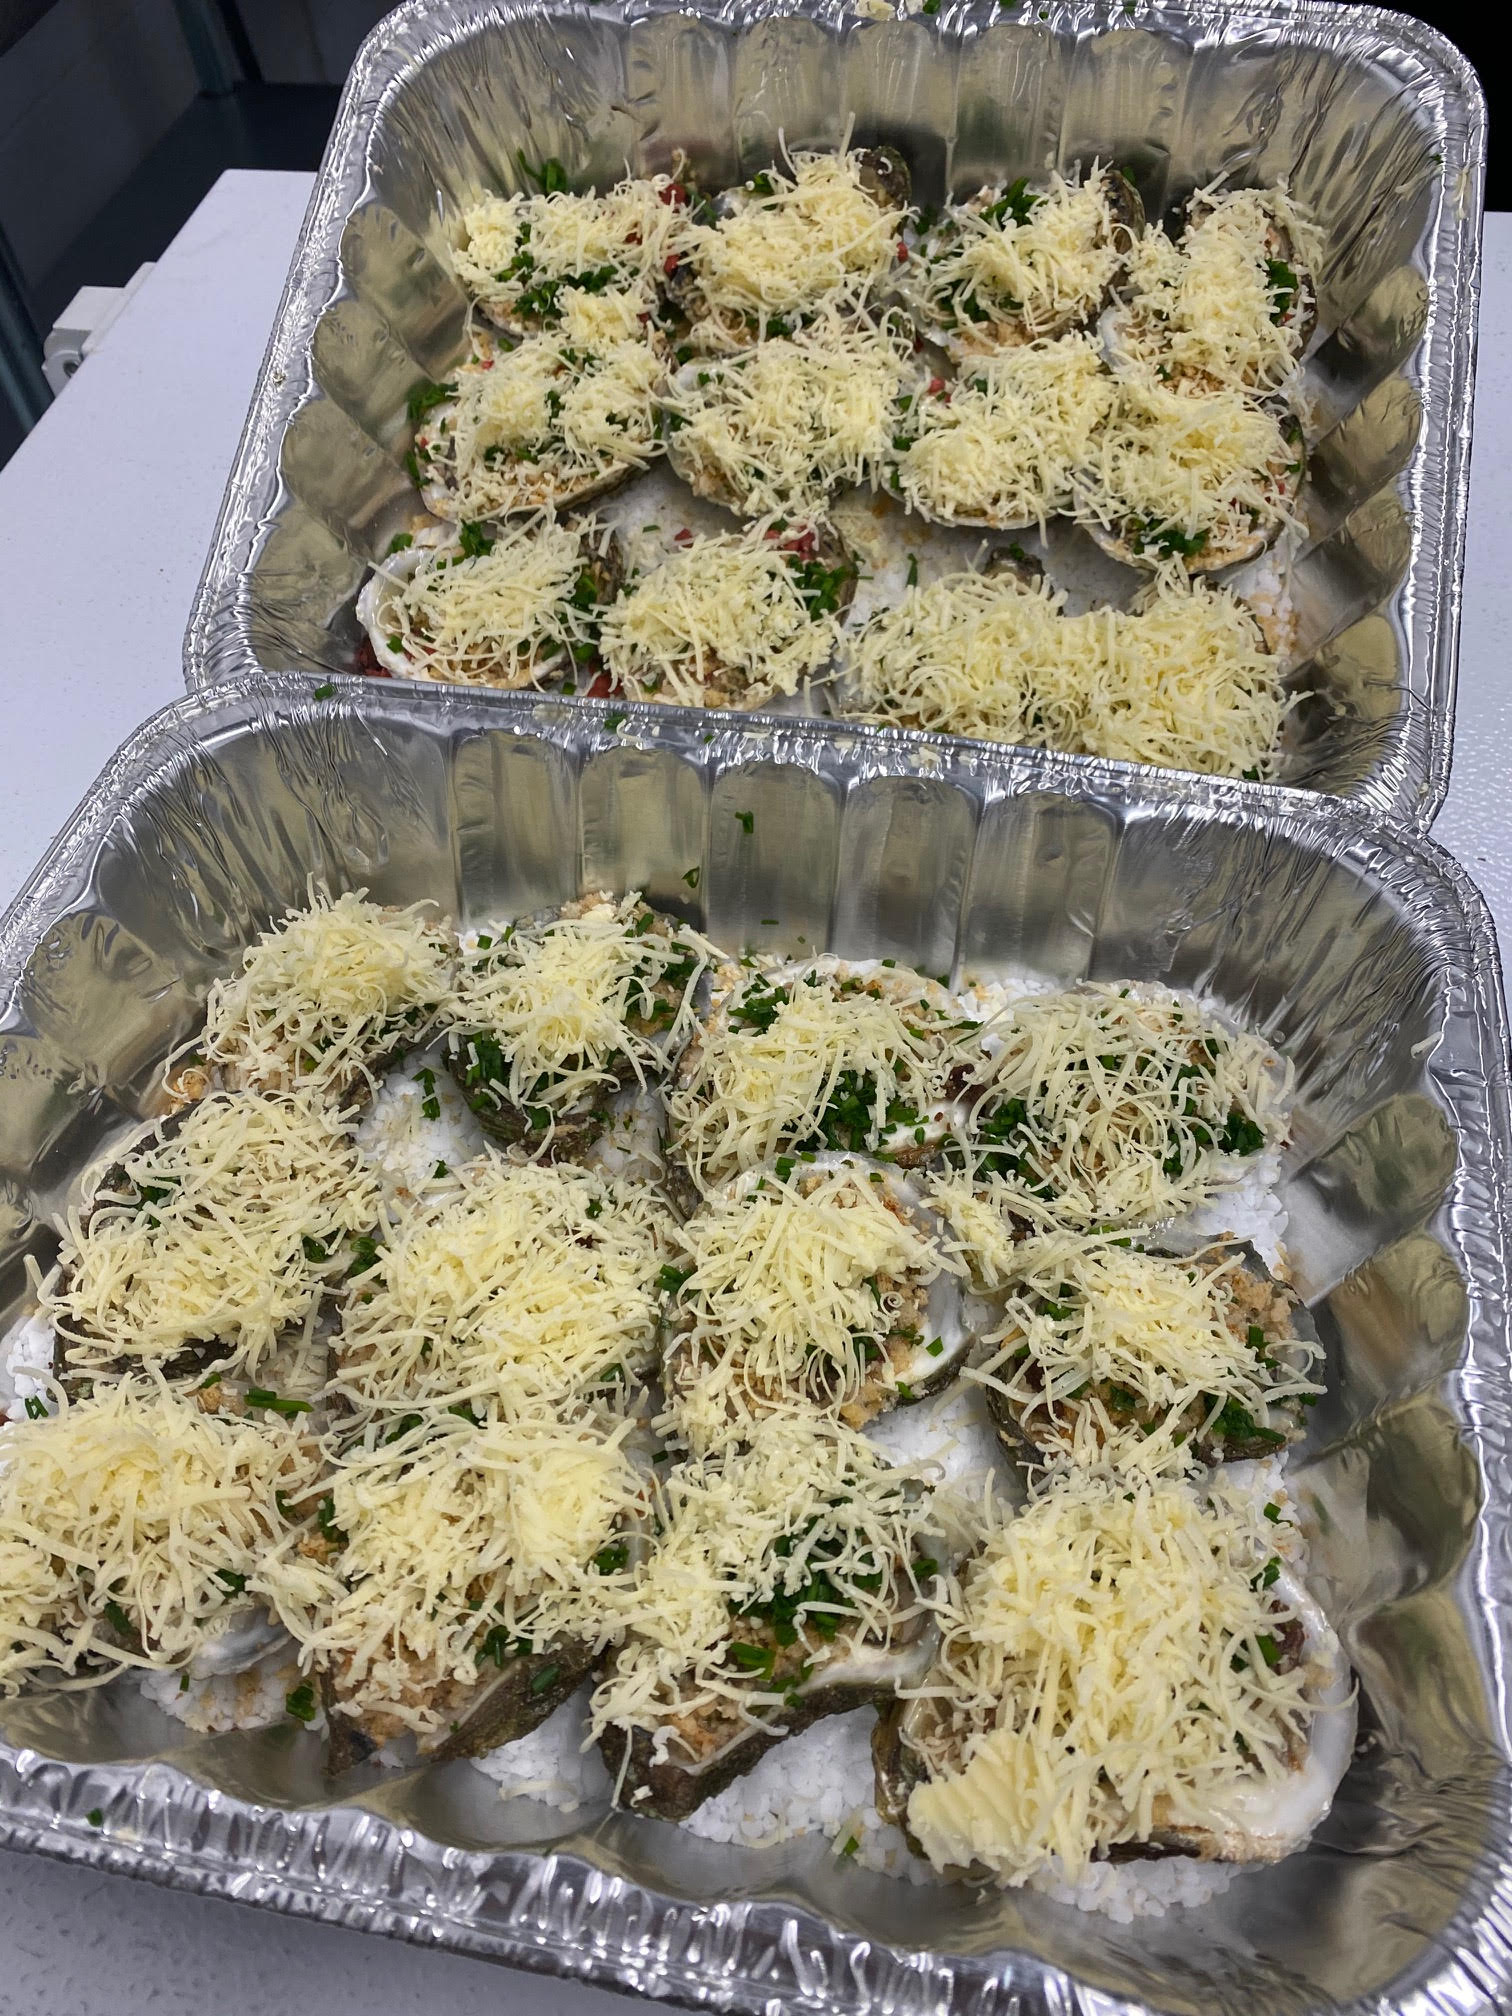 Gourmet Ready-to-Cook Oysters Rockefeller - 18 un. on Baking Tray